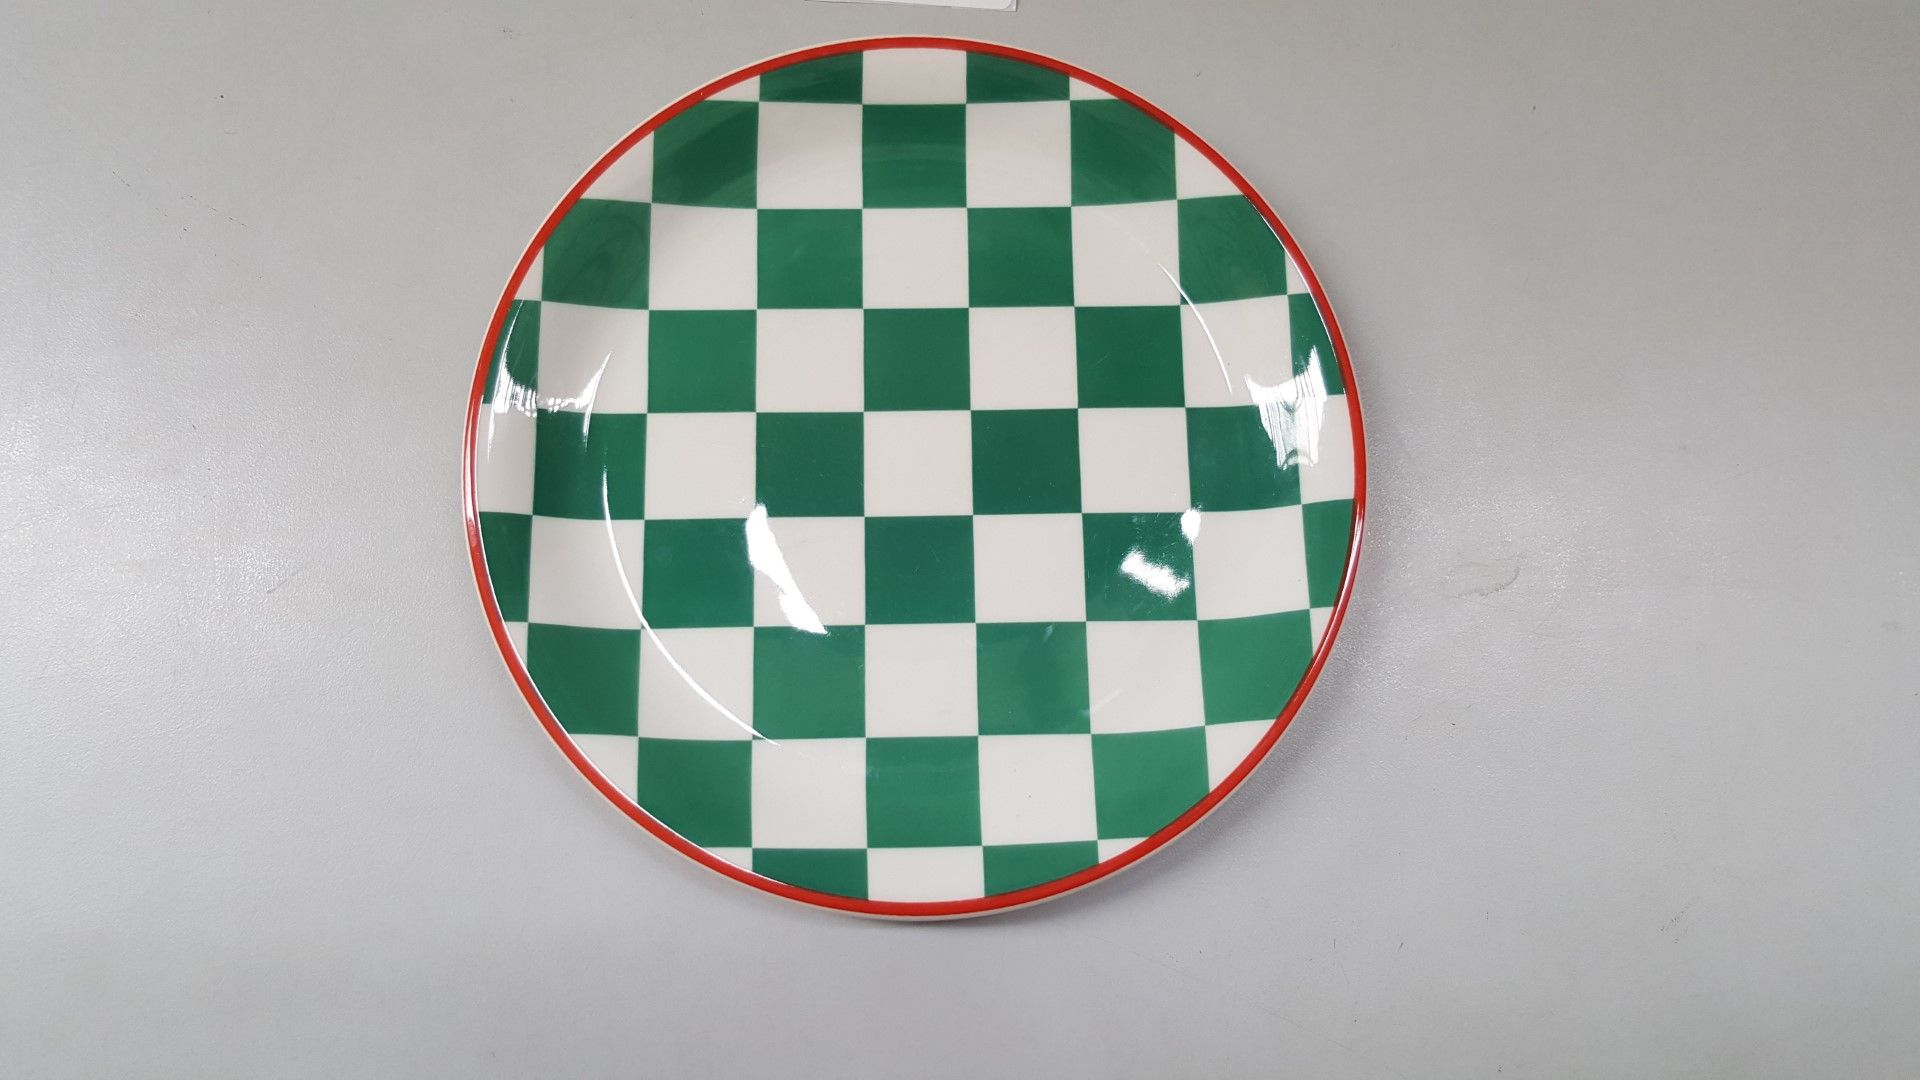 20 x Steelite Plates Checkered Green&White With Red Outline 20CM - Ref CQ284 - Image 2 of 4